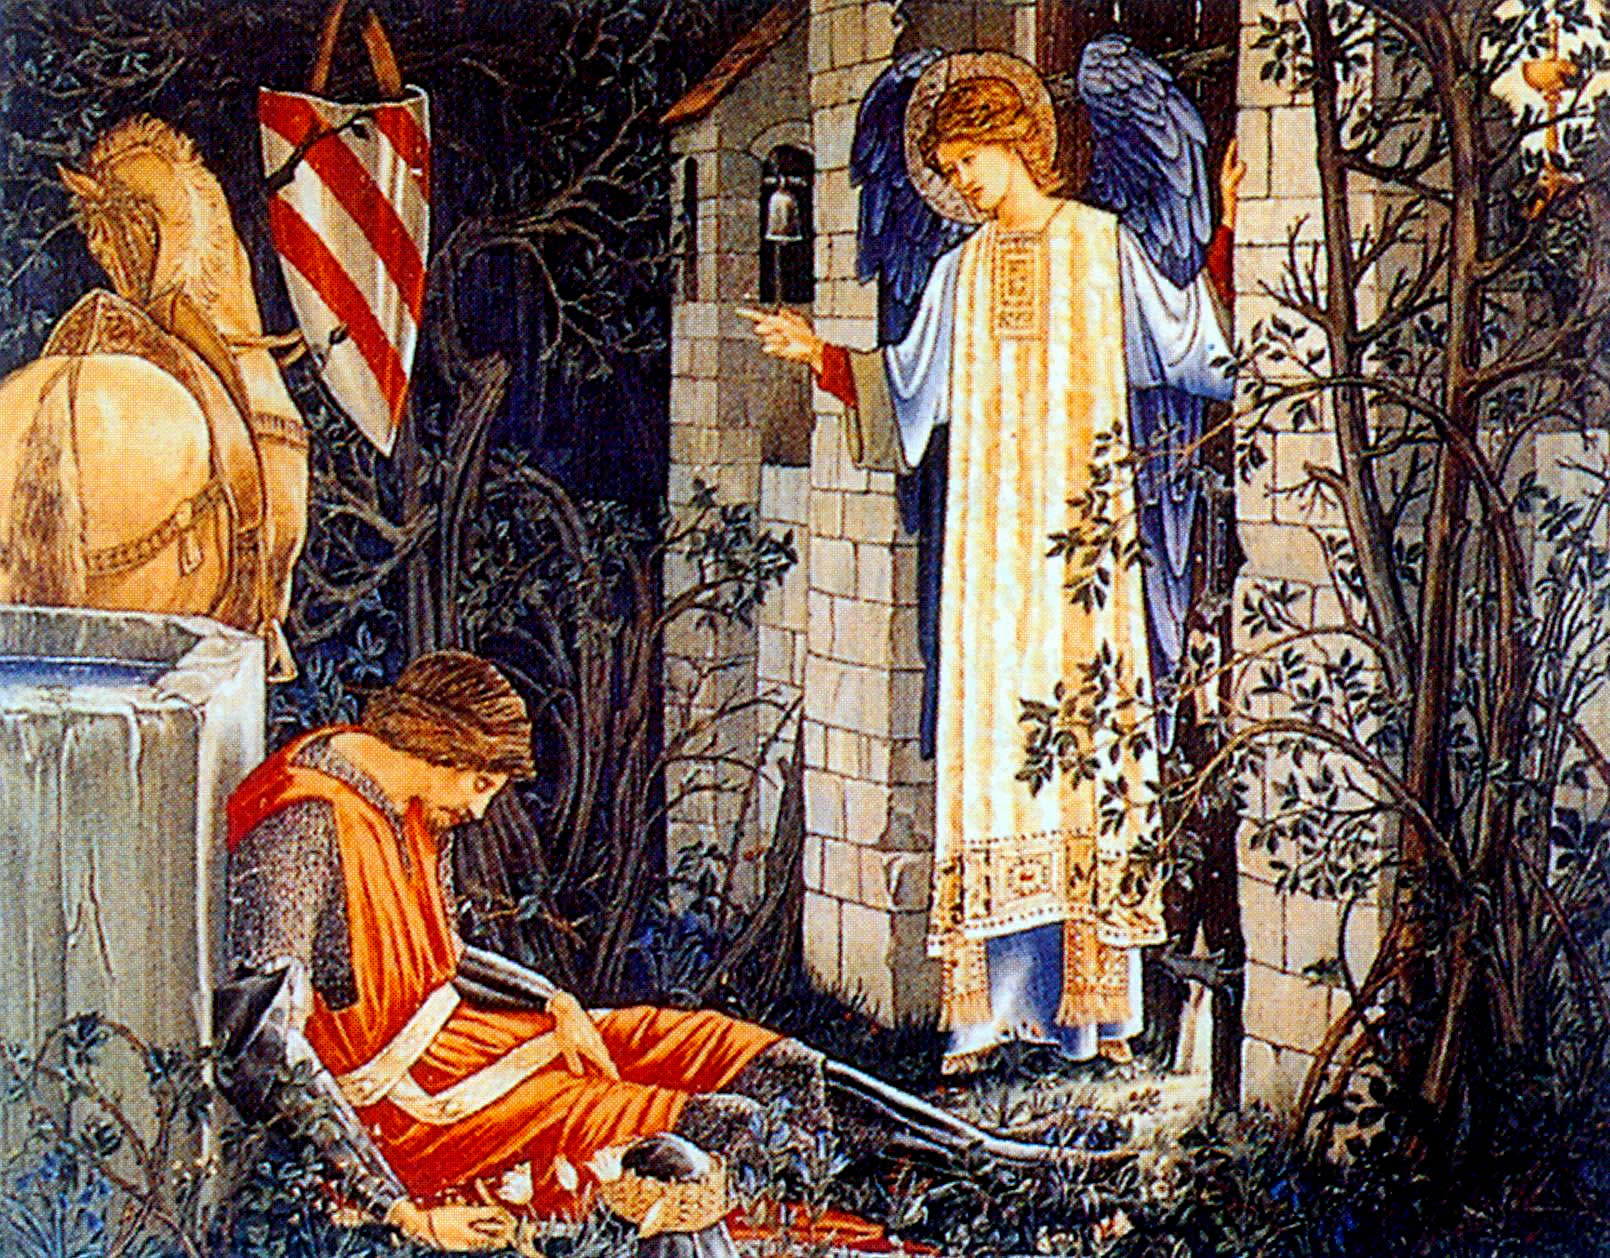 holy_grail_tapestry_the_failure_of_sir_launcelot